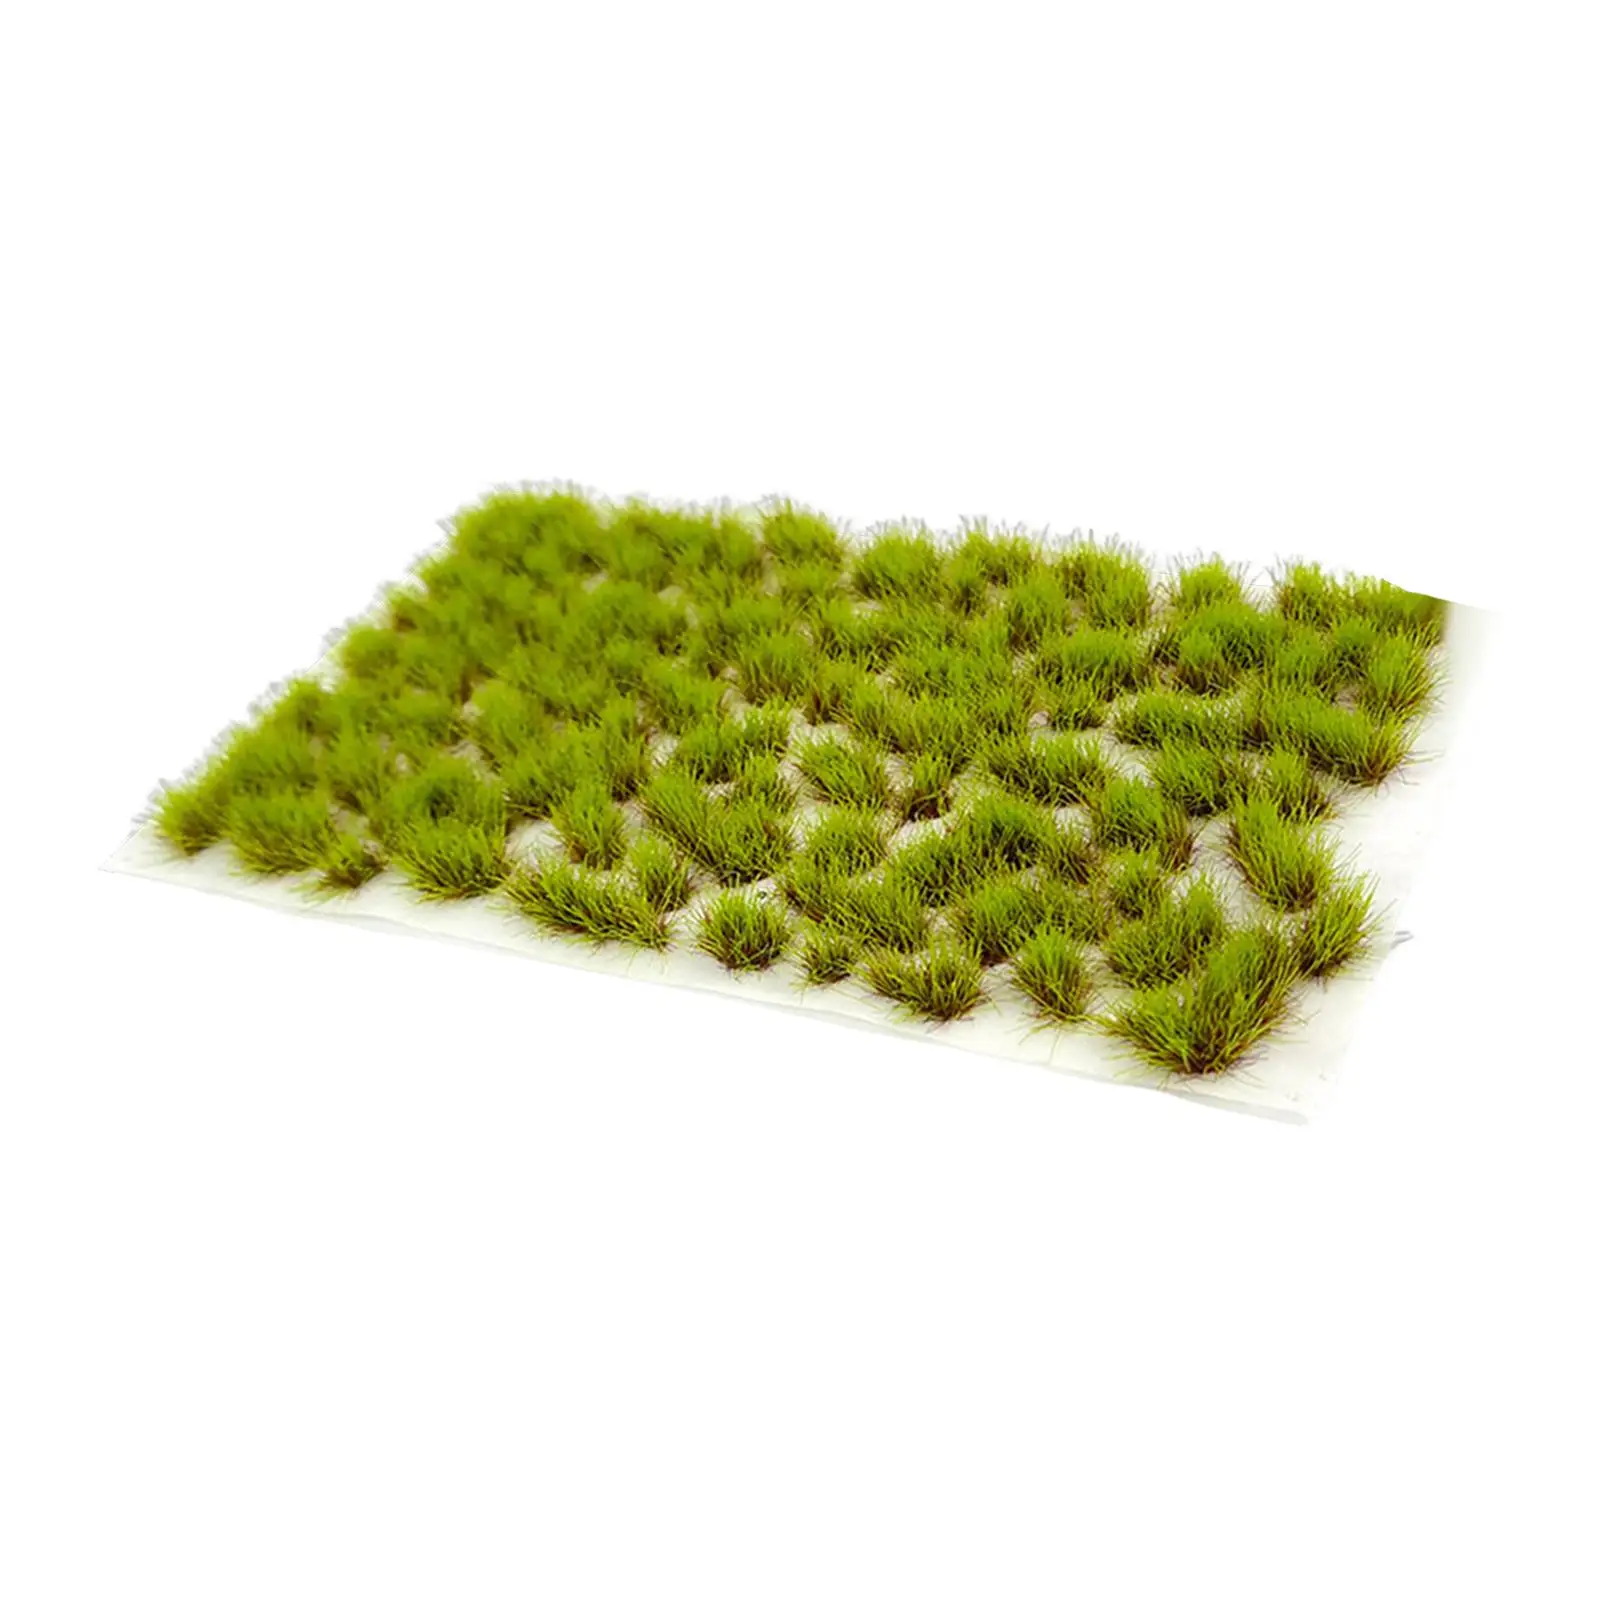 95 Pieces Large Cluster Grass Floral Cluster for Stand Table Railway Model